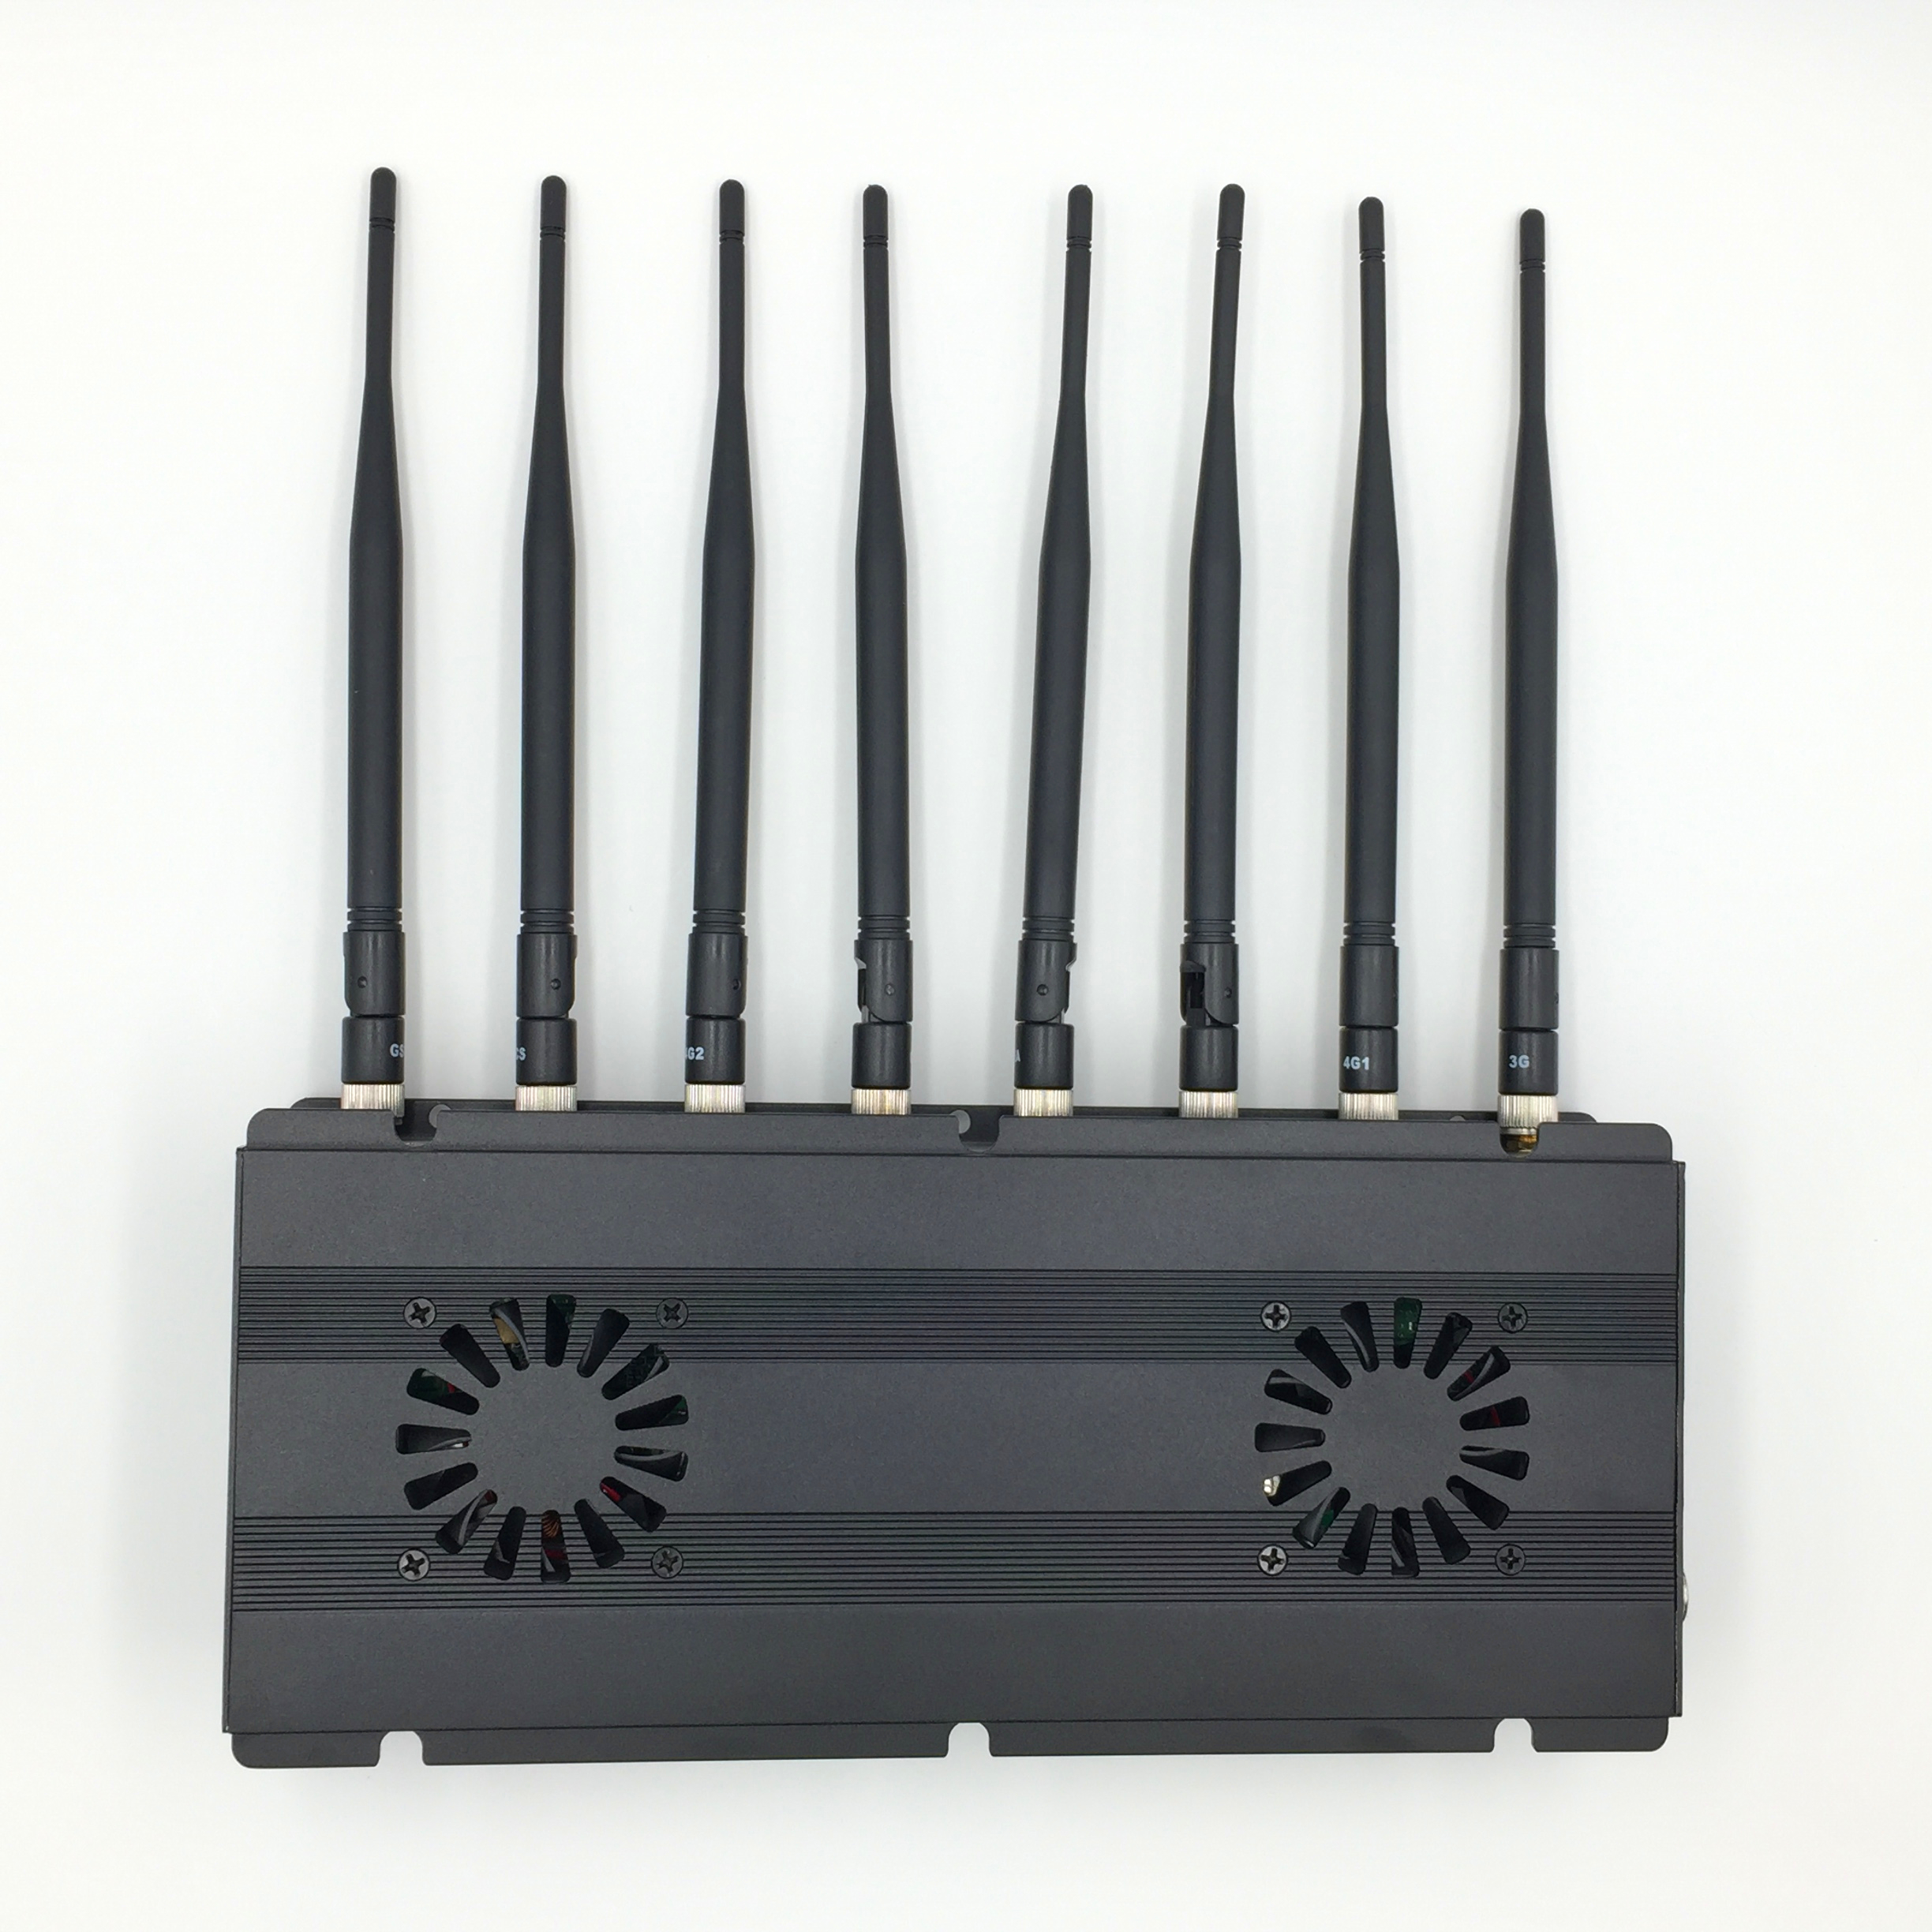 military drone jammer pdf | Black Desktop 8 Antenna Signal Jammers With GSM 3G 4G GPS WiFi LOJACK